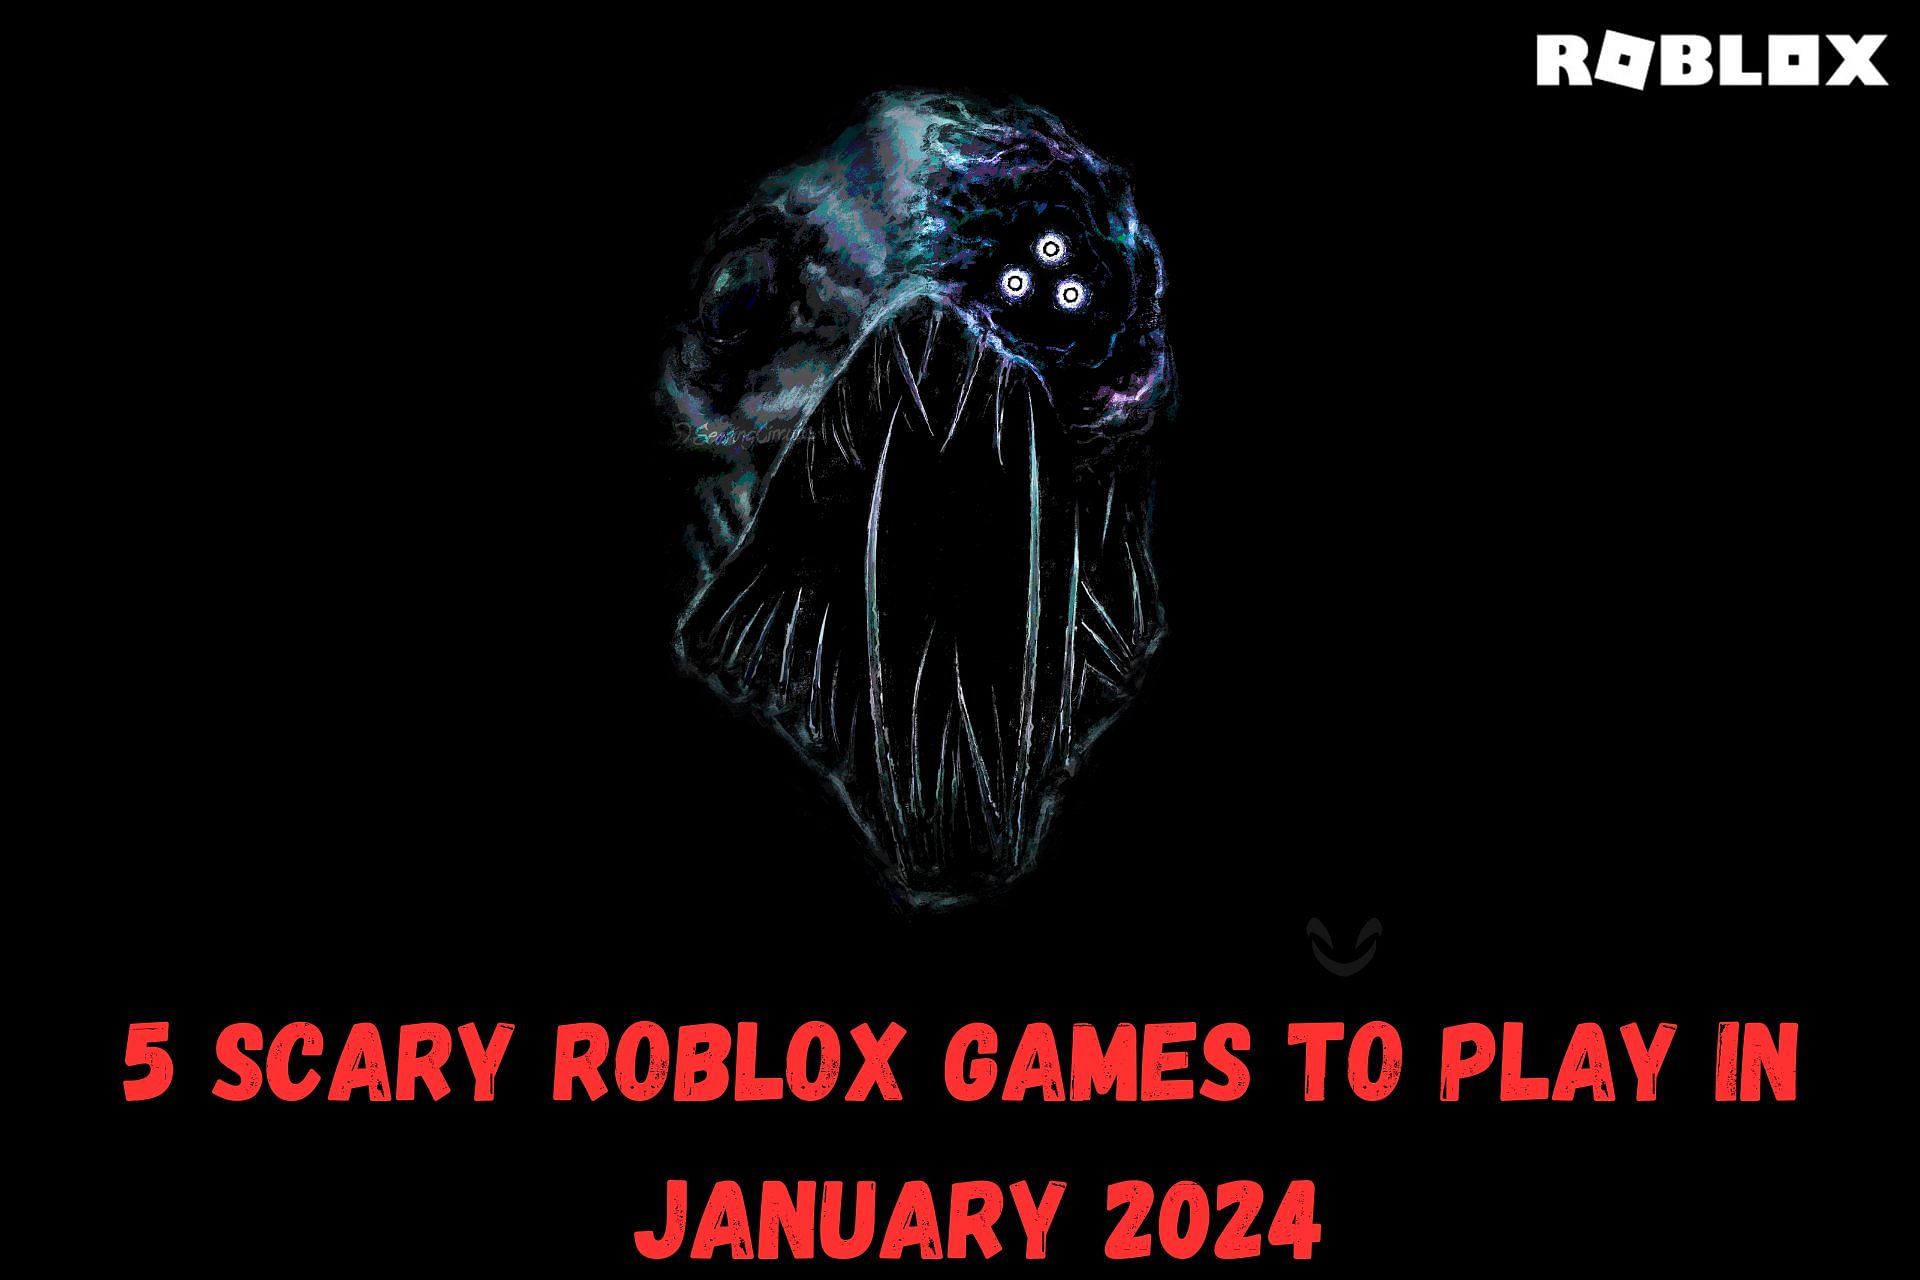 5 scary Roblox games to play in January 2024